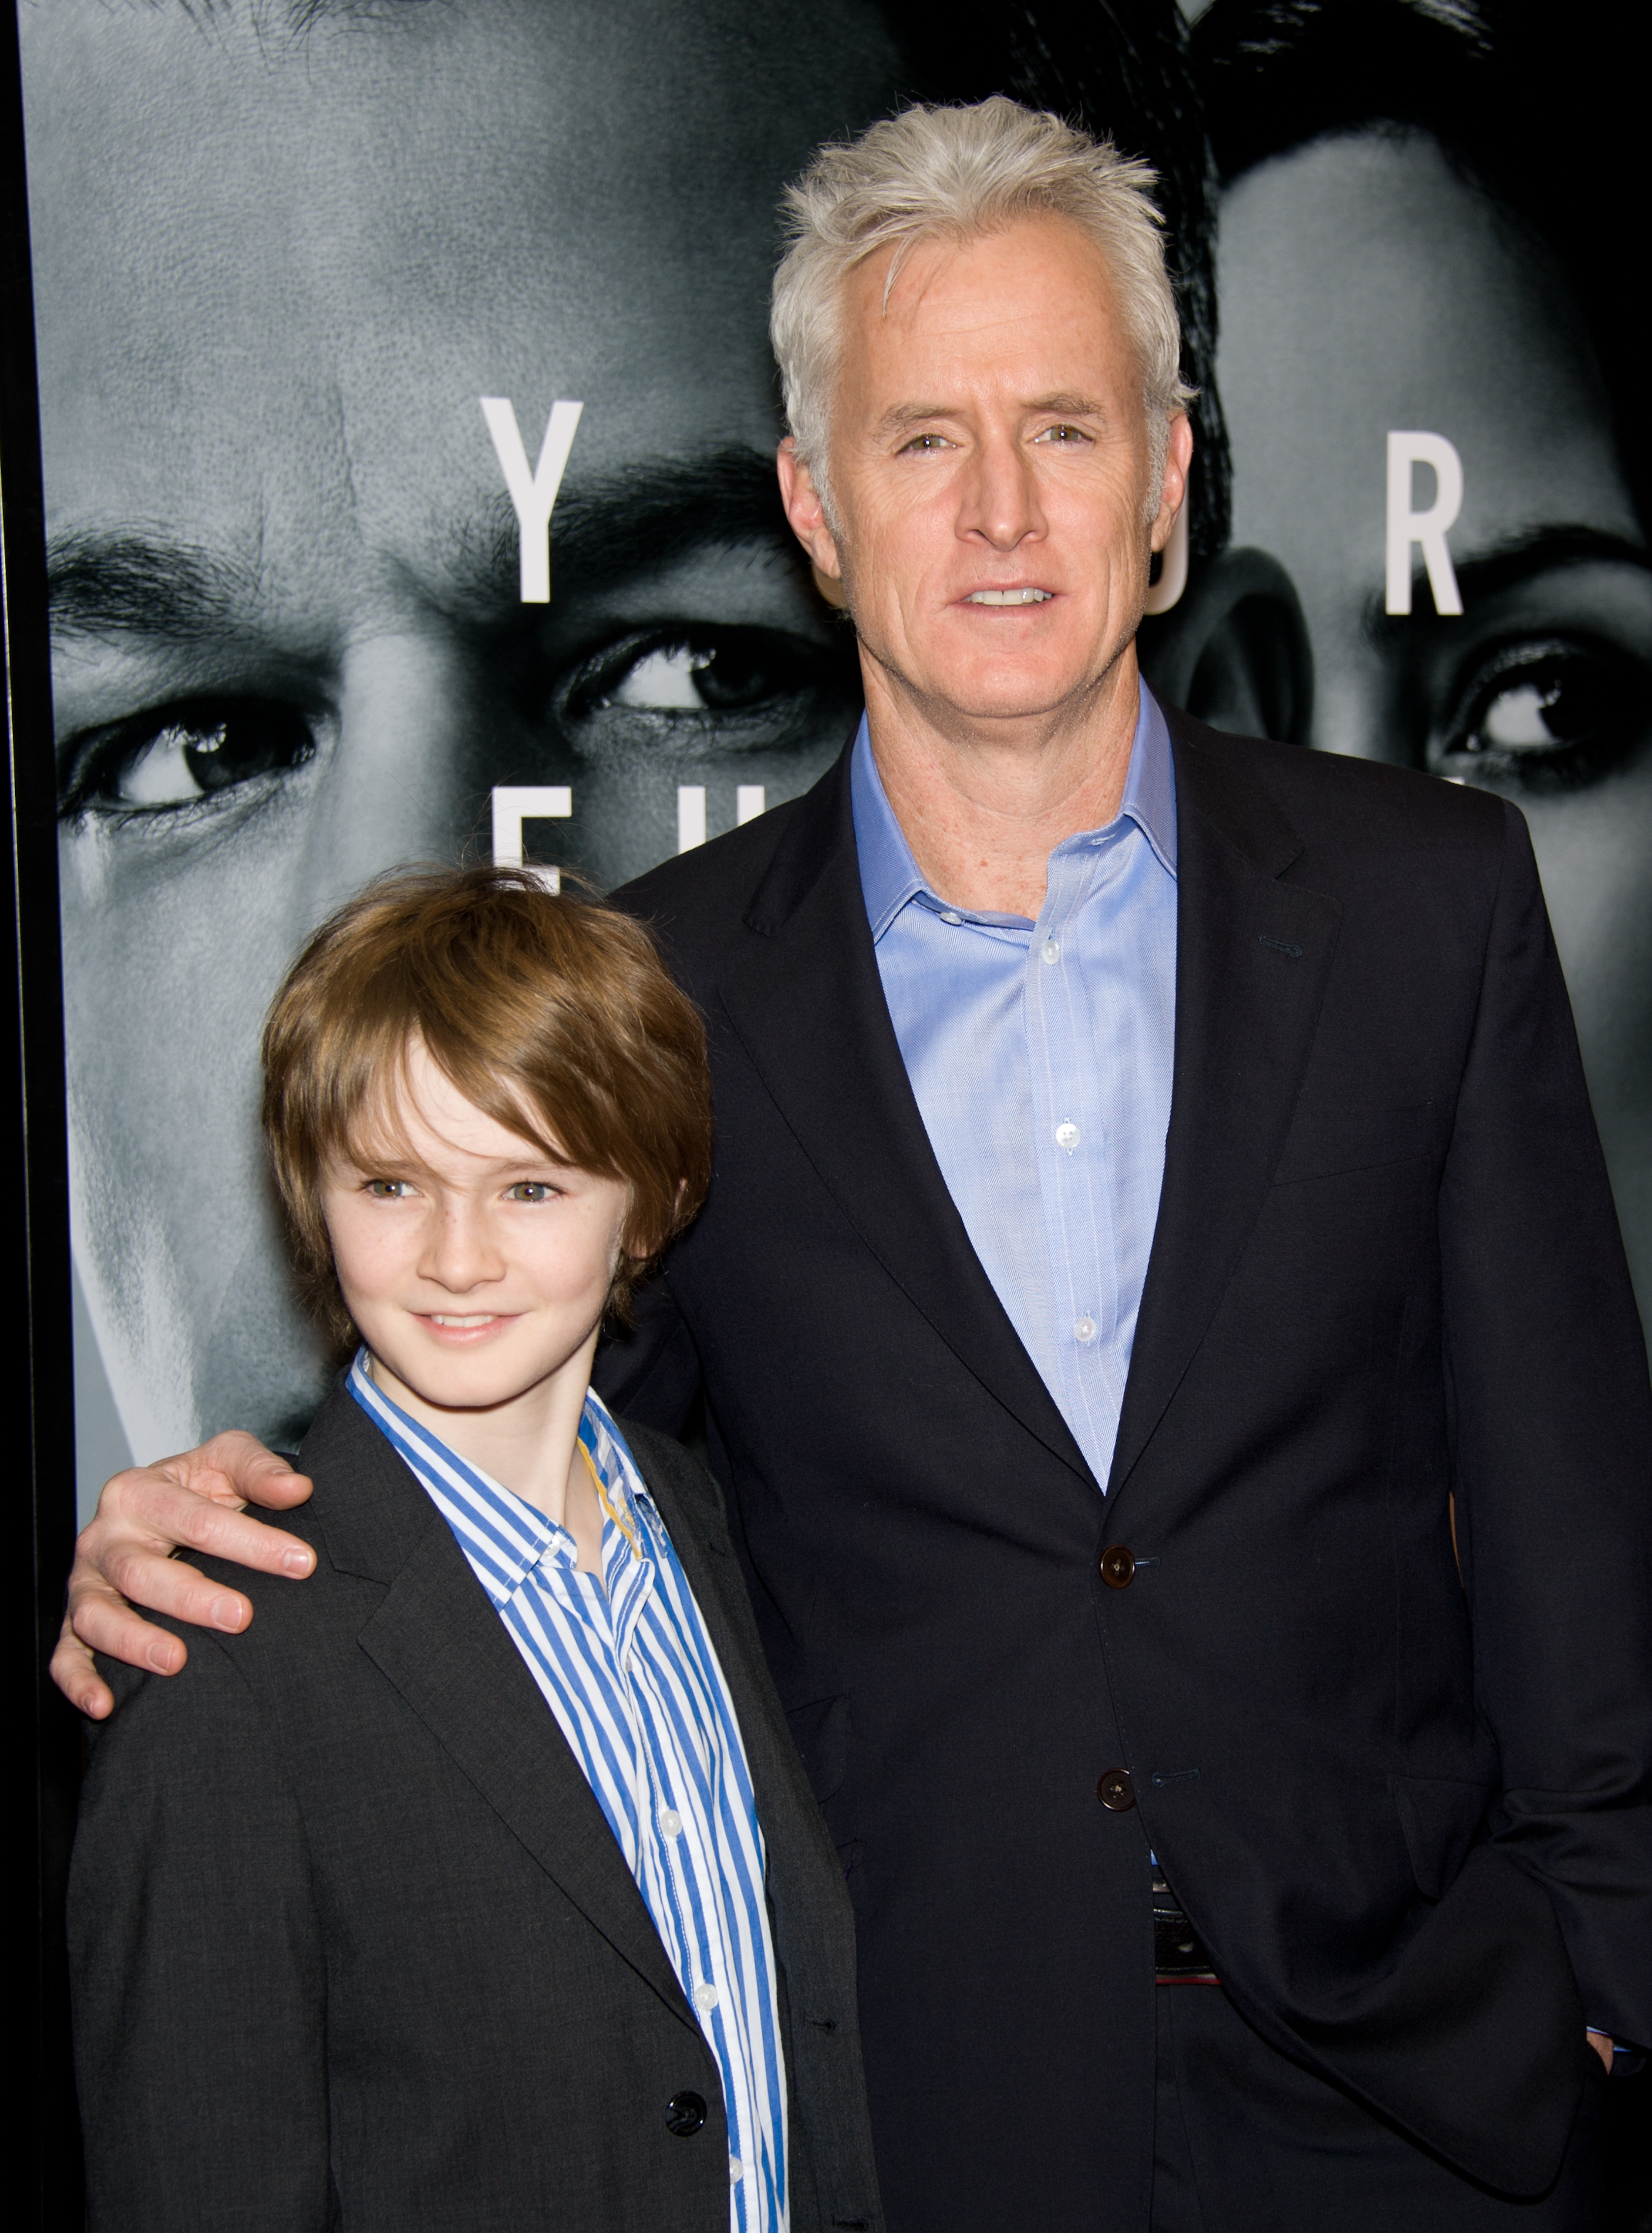 Harry and John Slattery at the premiere of "The Adjustment Bureau" in New York City on February 14, 2011 | Source: Getty Images